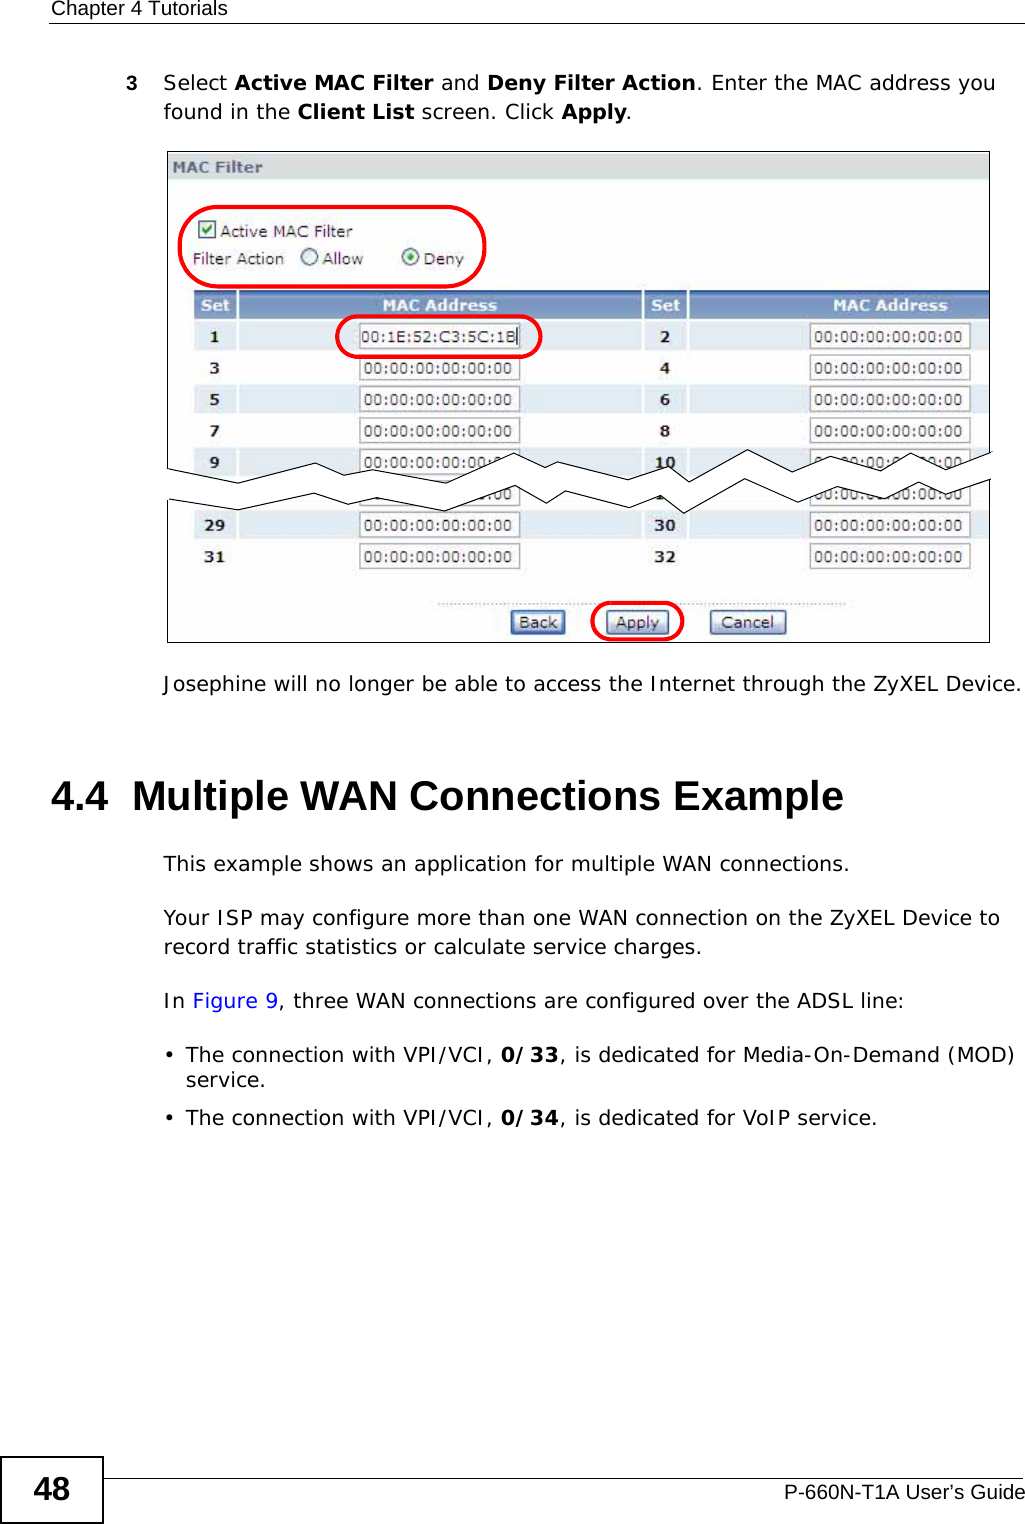 Chapter 4 TutorialsP-660N-T1A User’s Guide483Select Active MAC Filter and Deny Filter Action. Enter the MAC address you found in the Client List screen. Click Apply.Josephine will no longer be able to access the Internet through the ZyXEL Device.4.4  Multiple WAN Connections ExampleThis example shows an application for multiple WAN connections.Your ISP may configure more than one WAN connection on the ZyXEL Device to record traffic statistics or calculate service charges.In Figure 9, three WAN connections are configured over the ADSL line:• The connection with VPI/VCI, 0/33, is dedicated for Media-On-Demand (MOD) service.• The connection with VPI/VCI, 0/34, is dedicated for VoIP service.